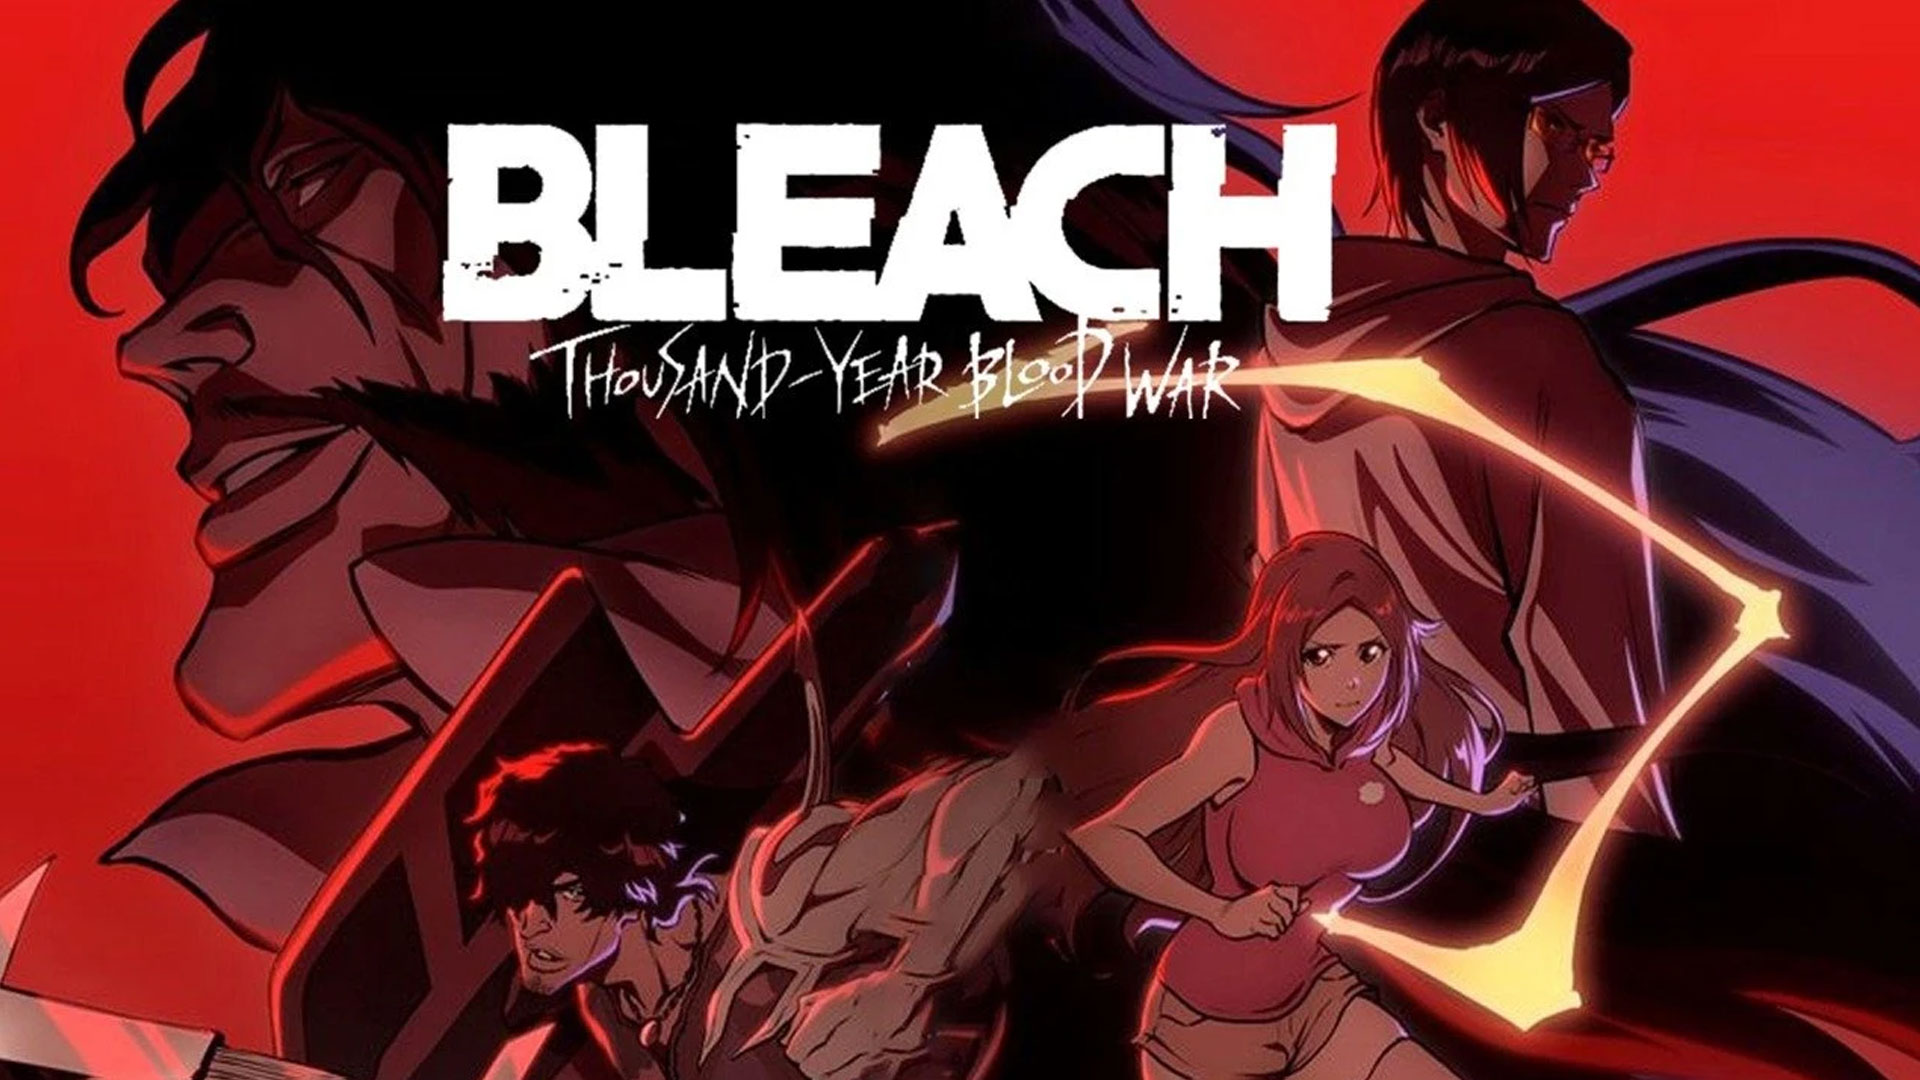 Bleach: Thousand-Year Blood War is the Adaptation We Asked For